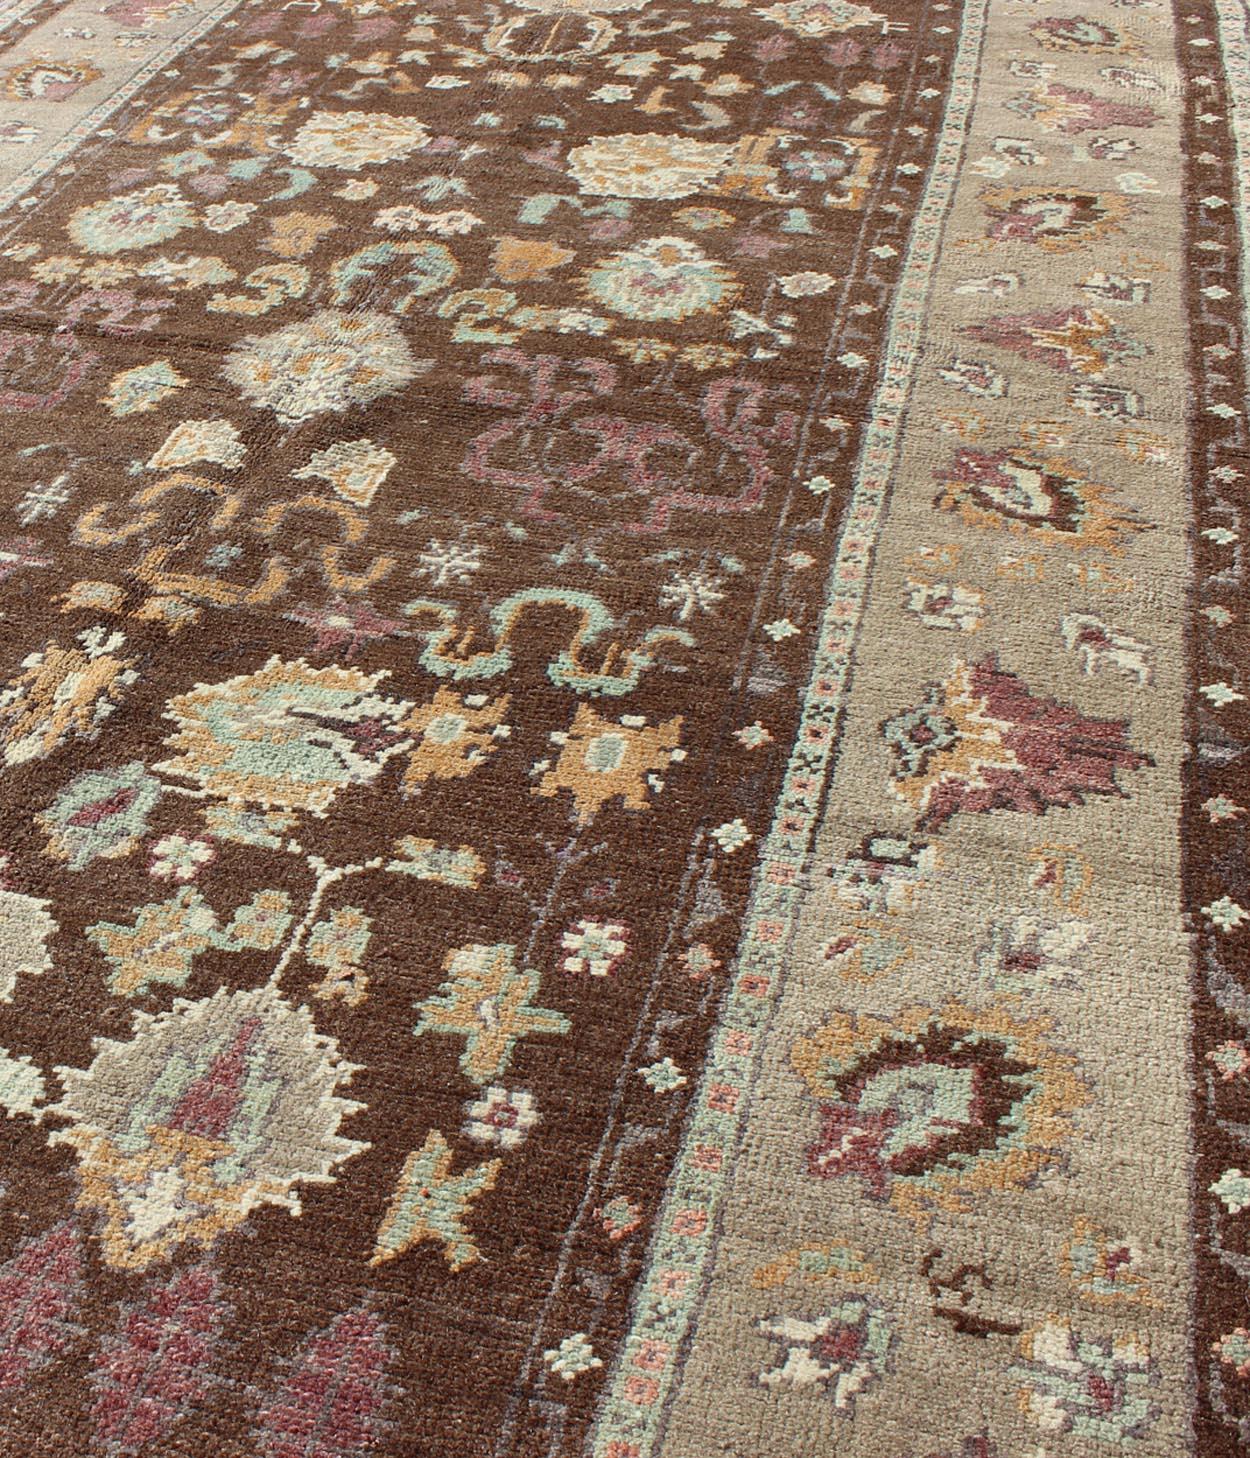 Wool Vintage Turkish Oushak Rug in Brown Background with All-Over Floral Design For Sale